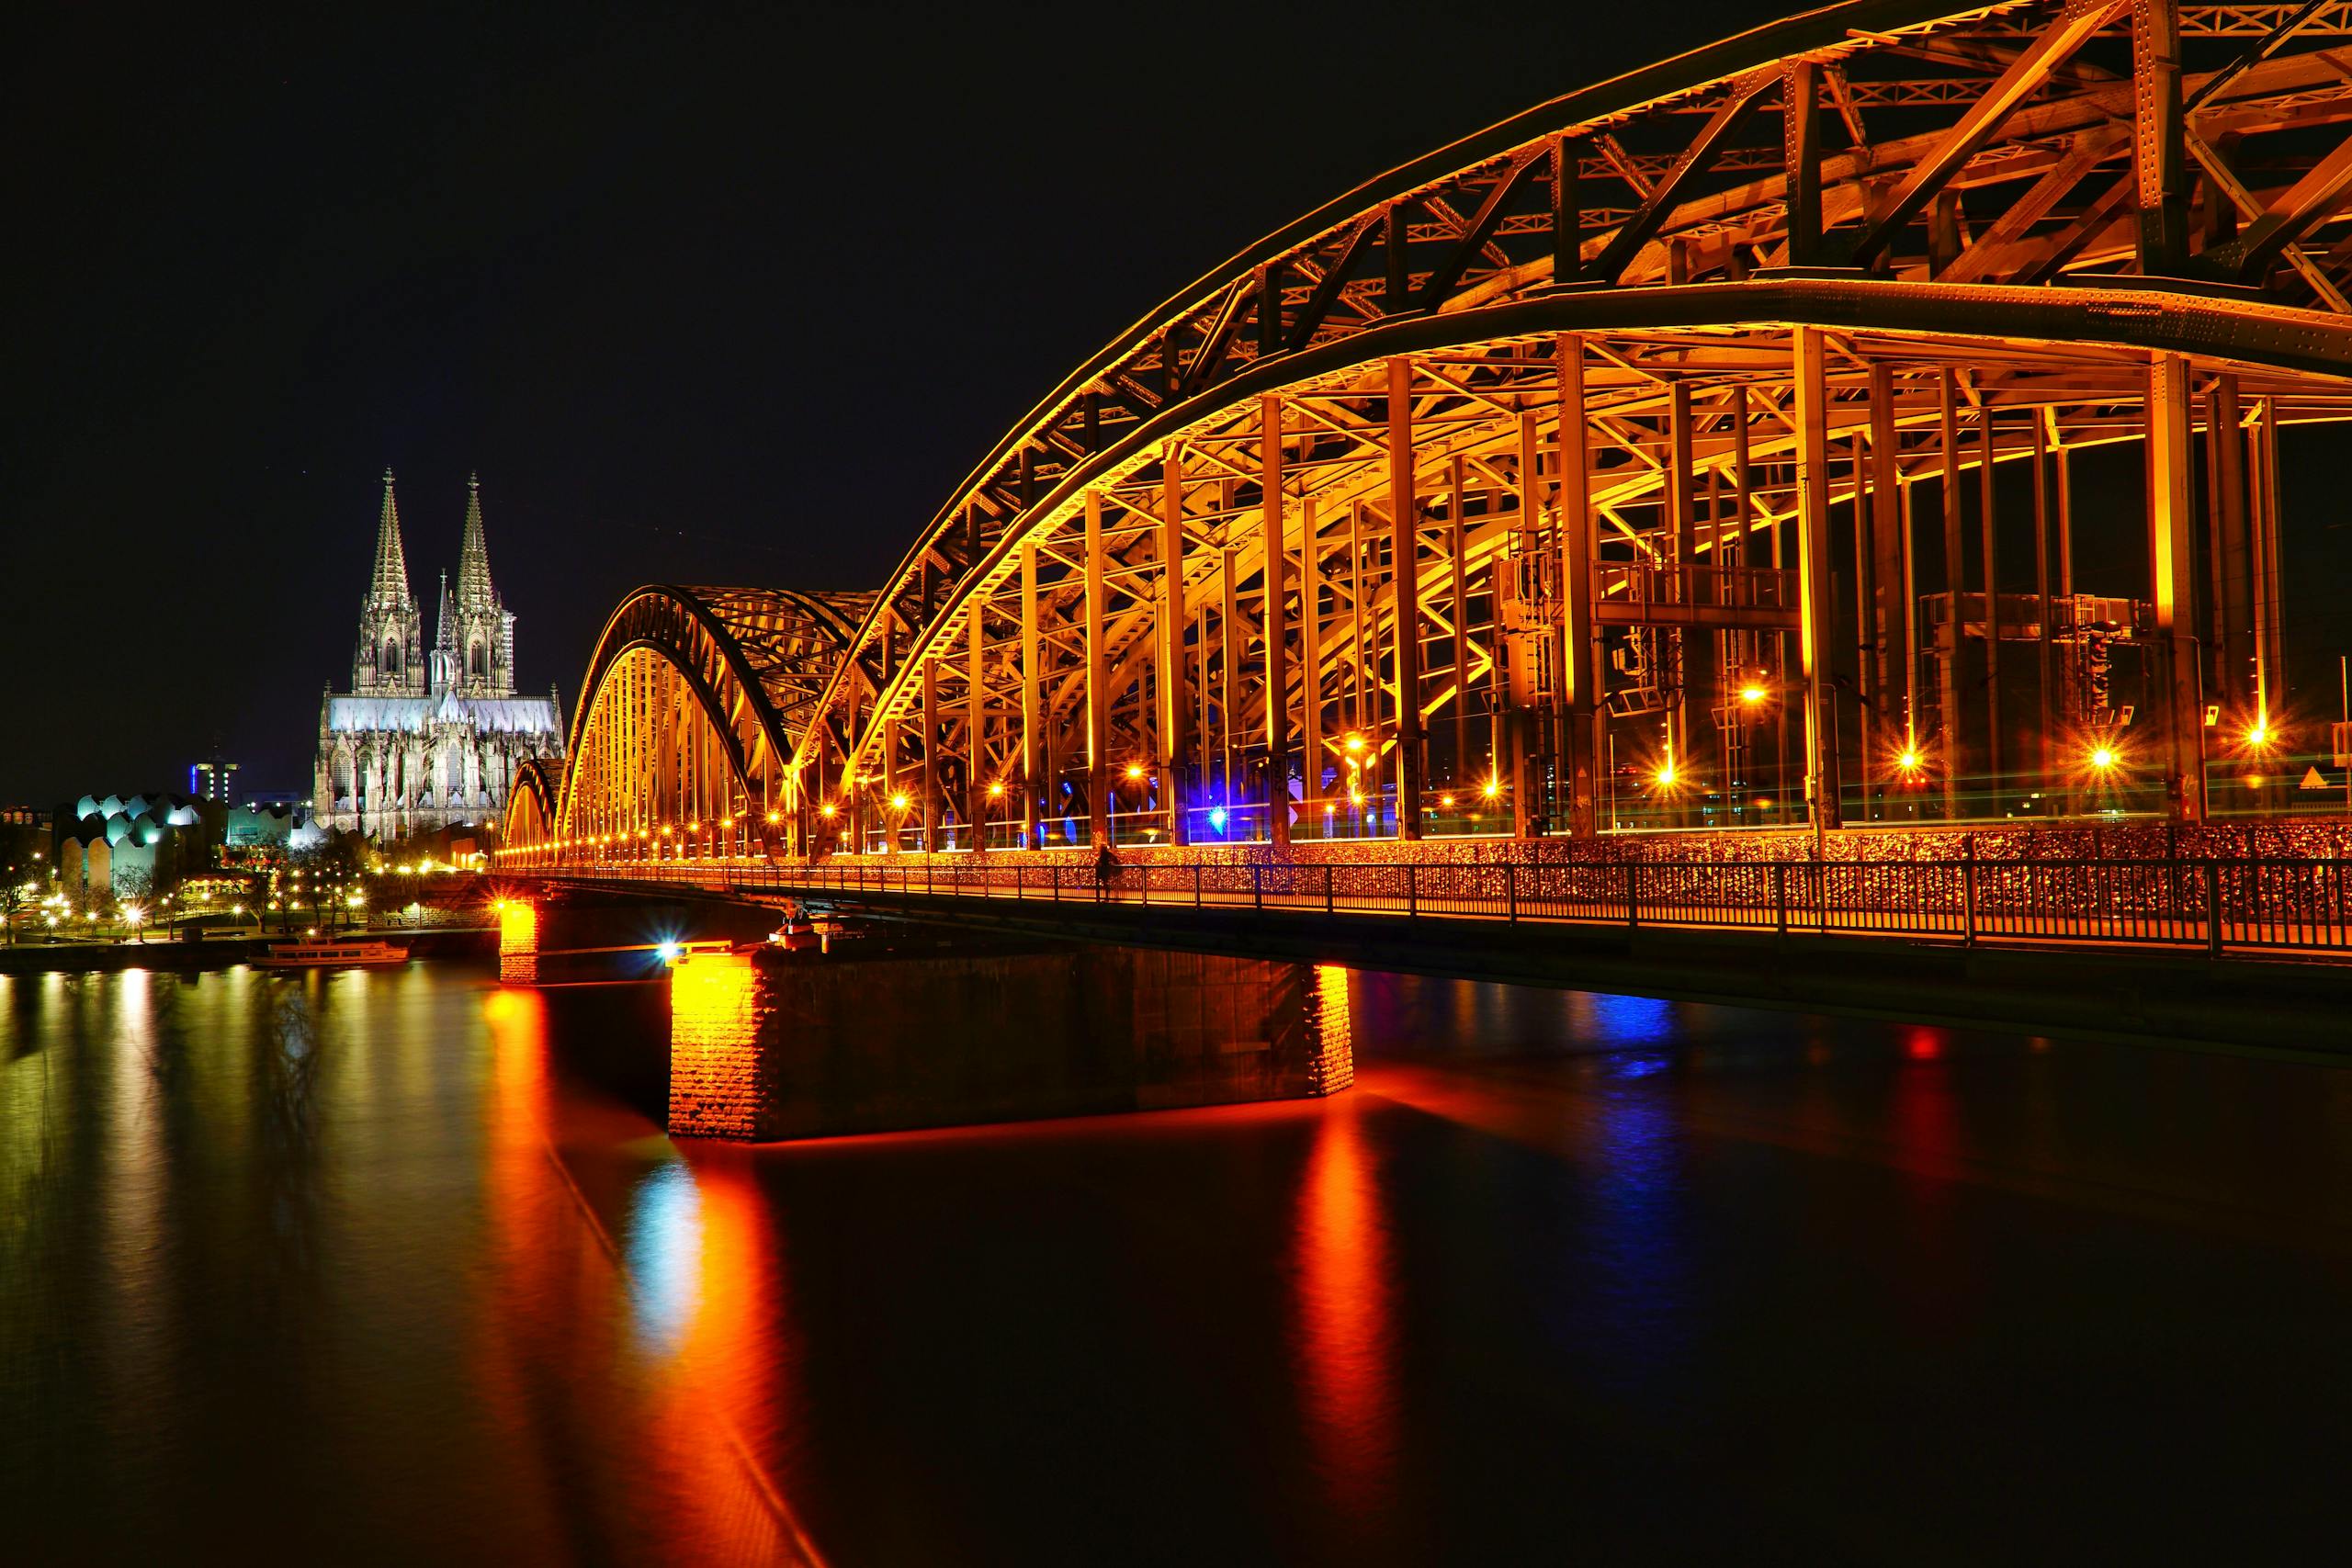 Lighted Bridge and View of Church at Nighttime